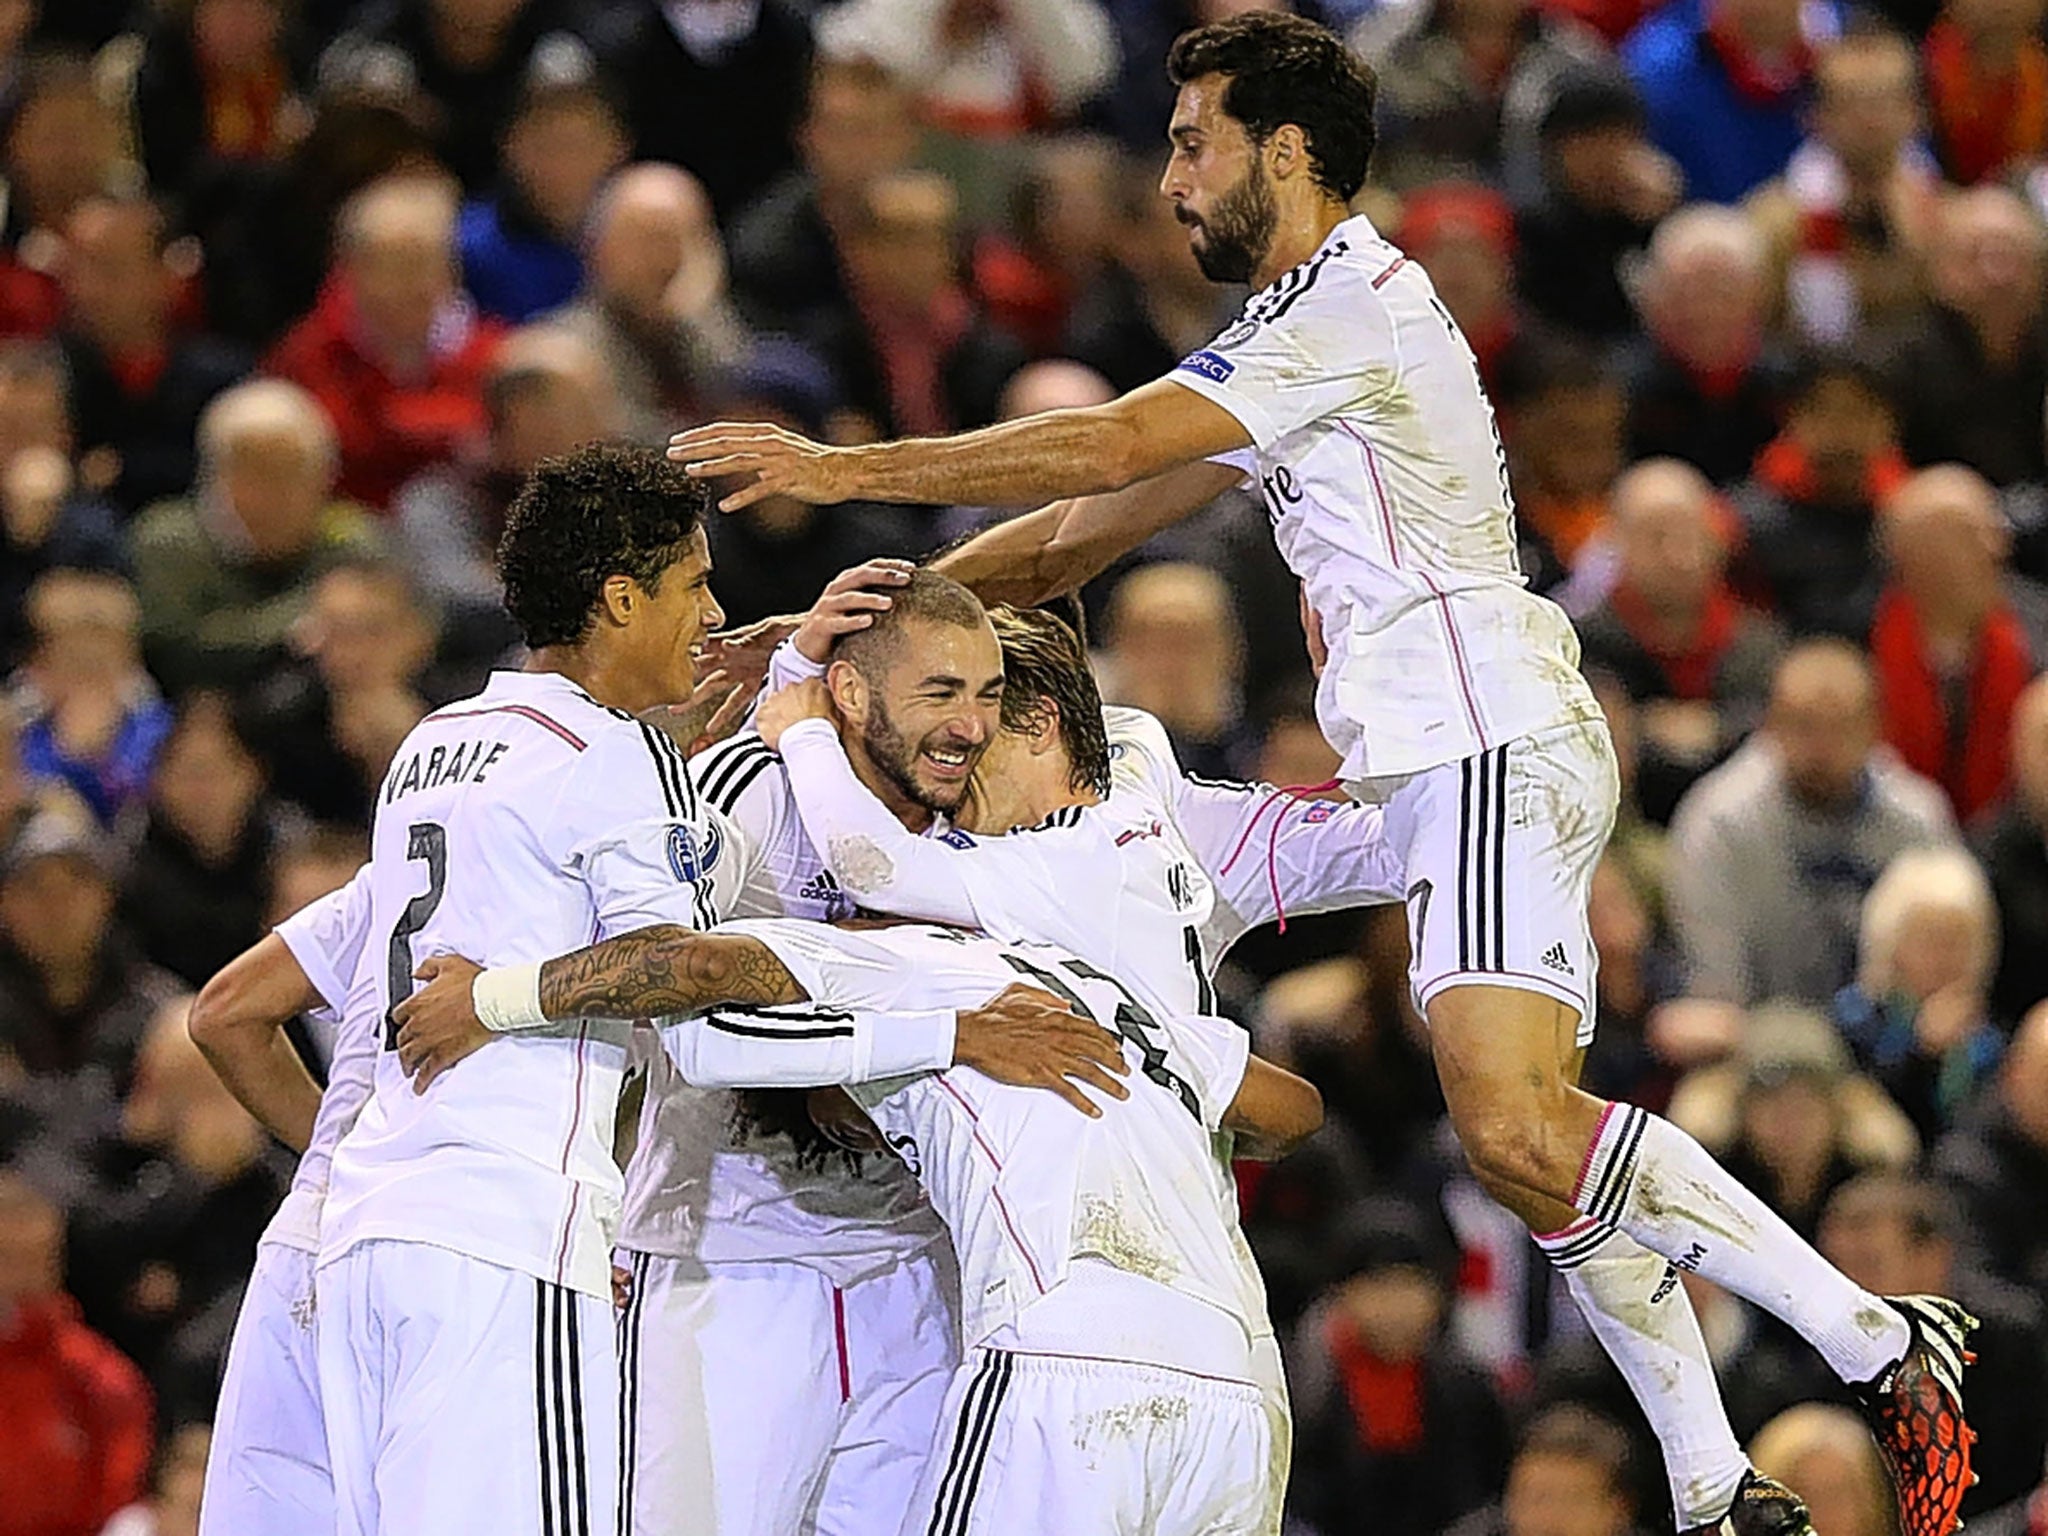 Karim Benzema (centre) is mobbed after scoring Real’s third goal